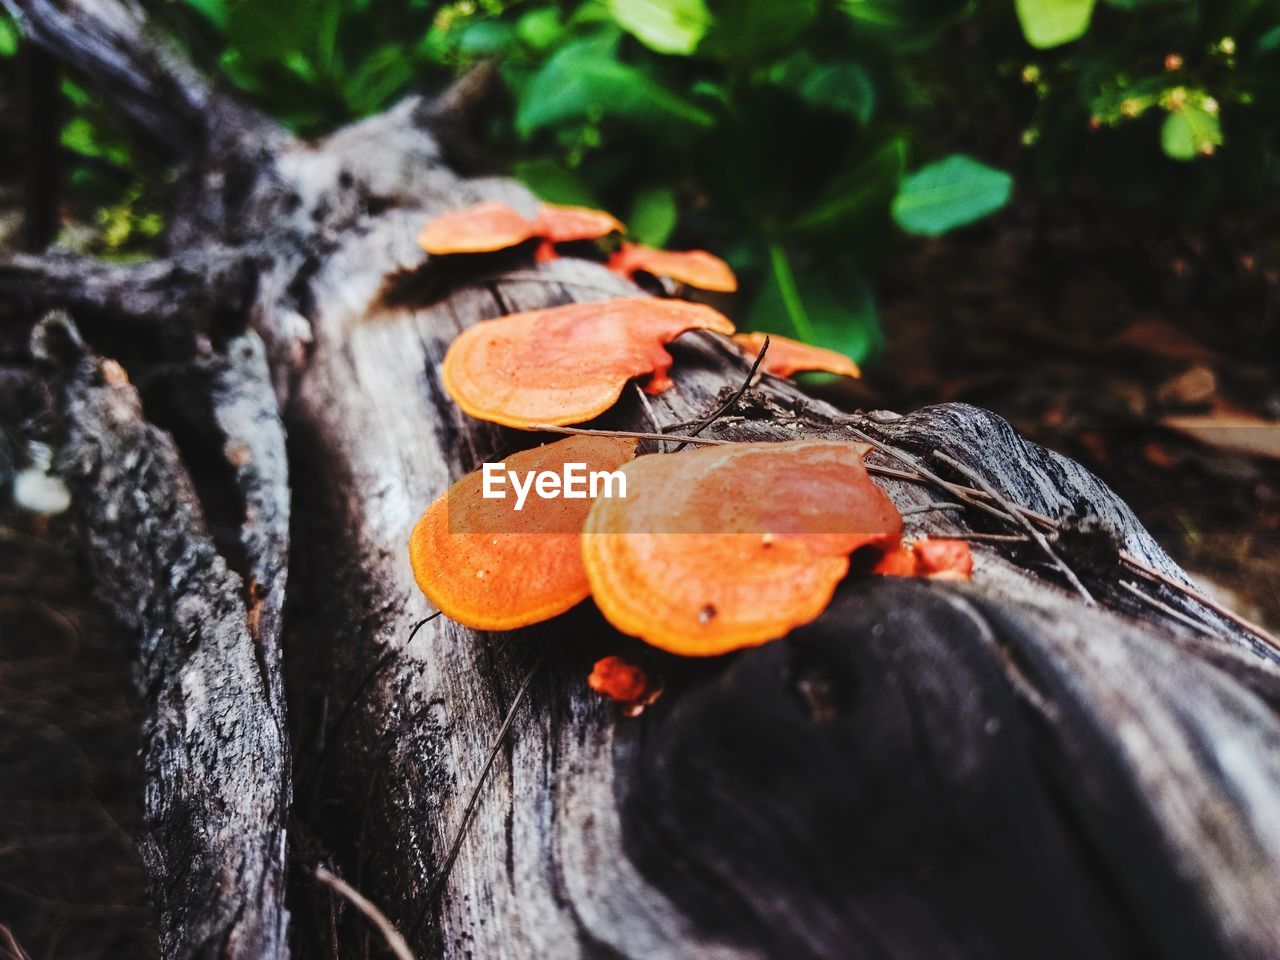 Mushrooms growing on tree in forest